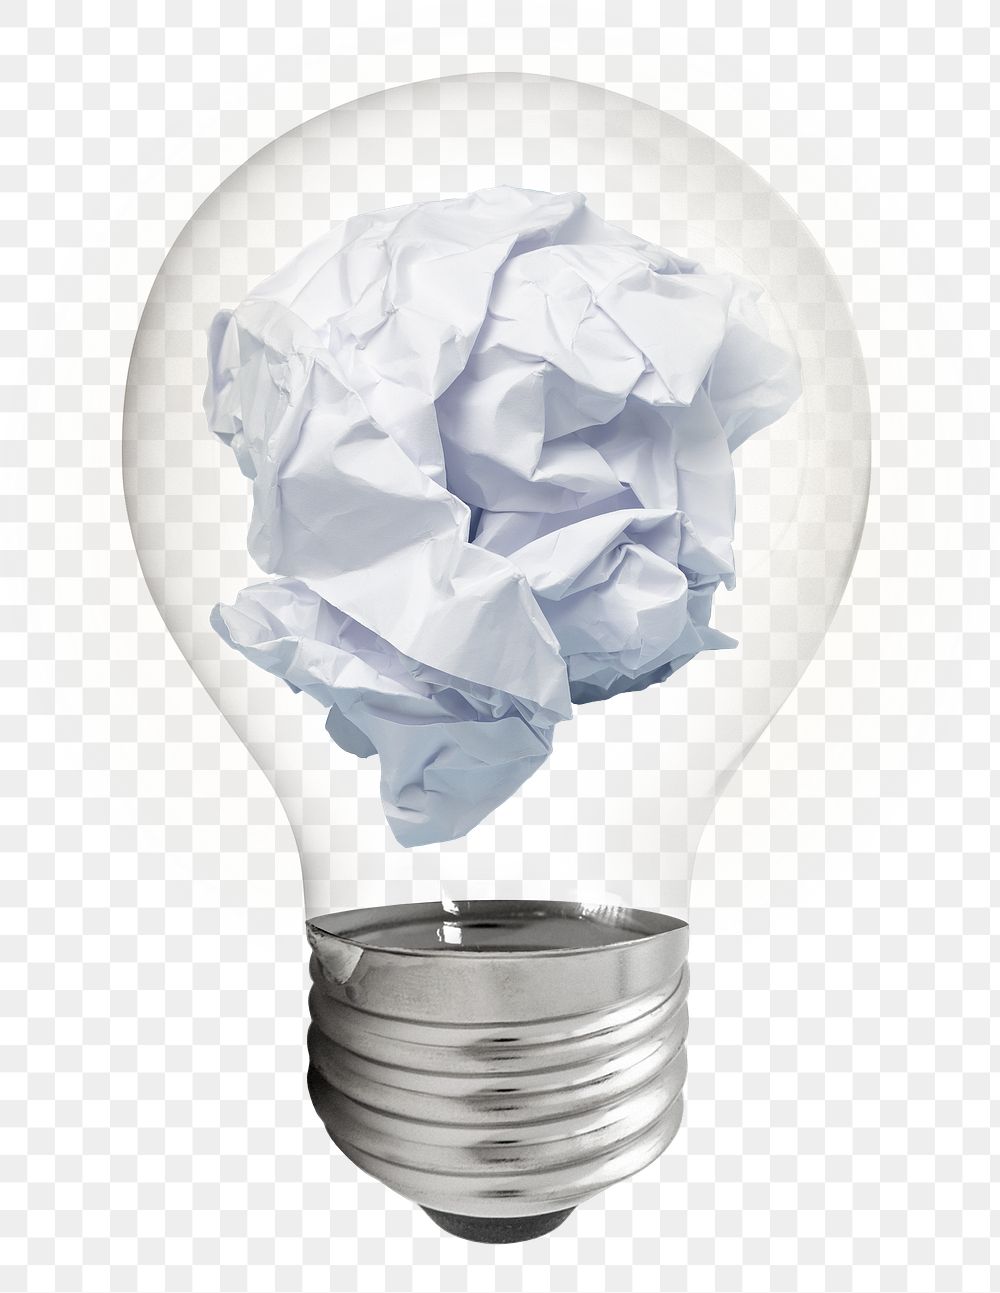 Crumpled paper png sticker, light bulb stationery creative remix on transparent background